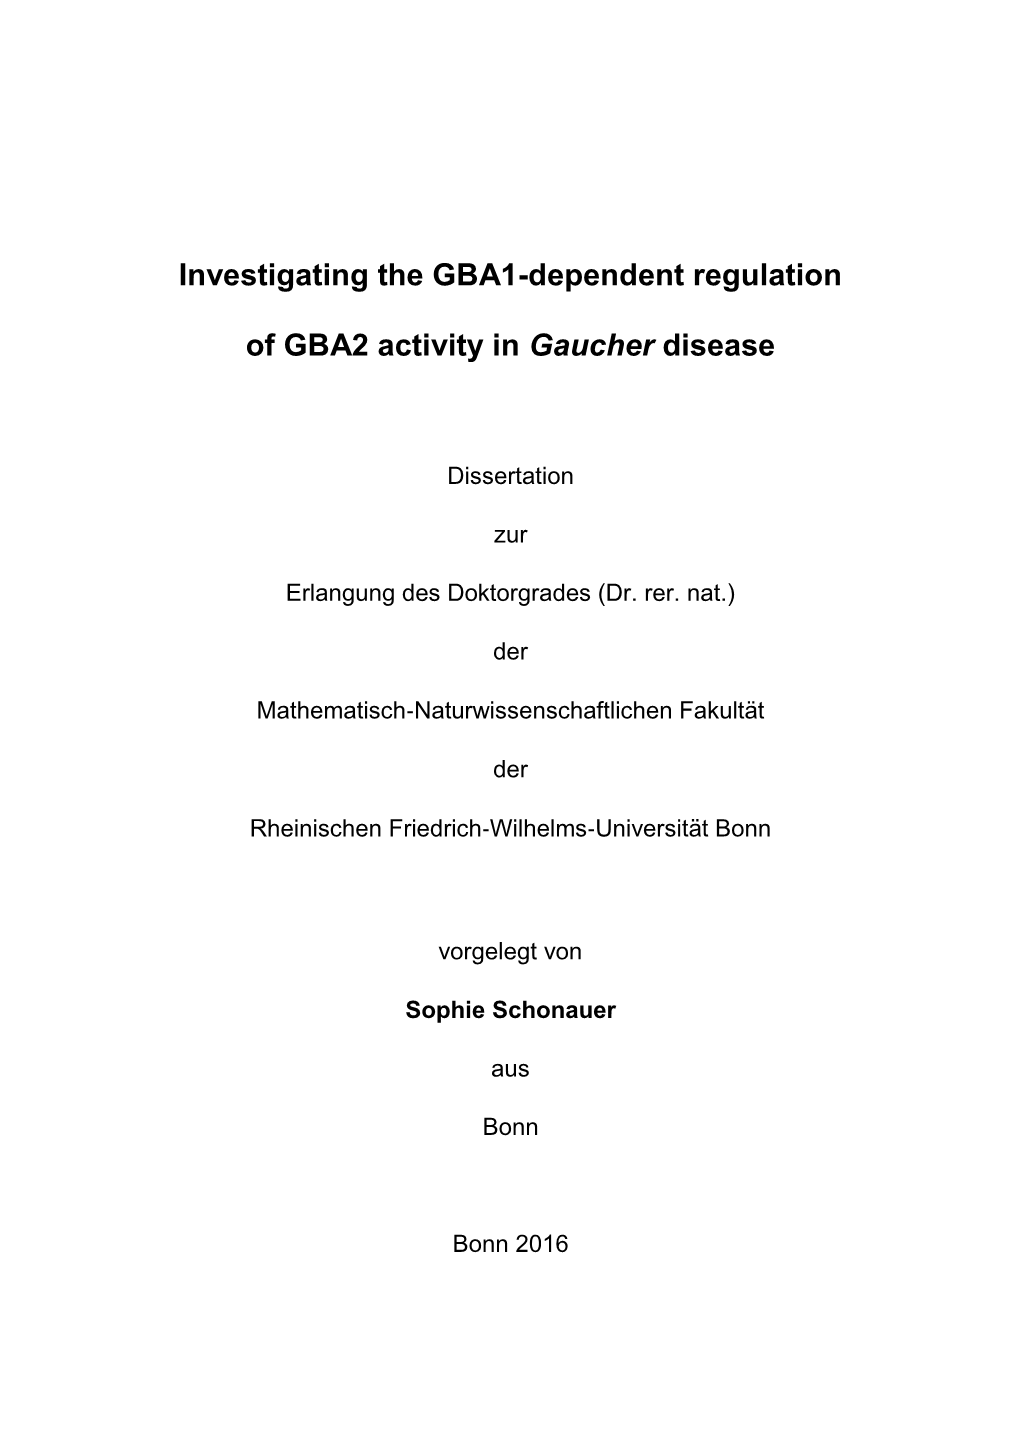 Investigating the GBA1-Dependent Regulation of GBA2 Activity in Gaucher Disease